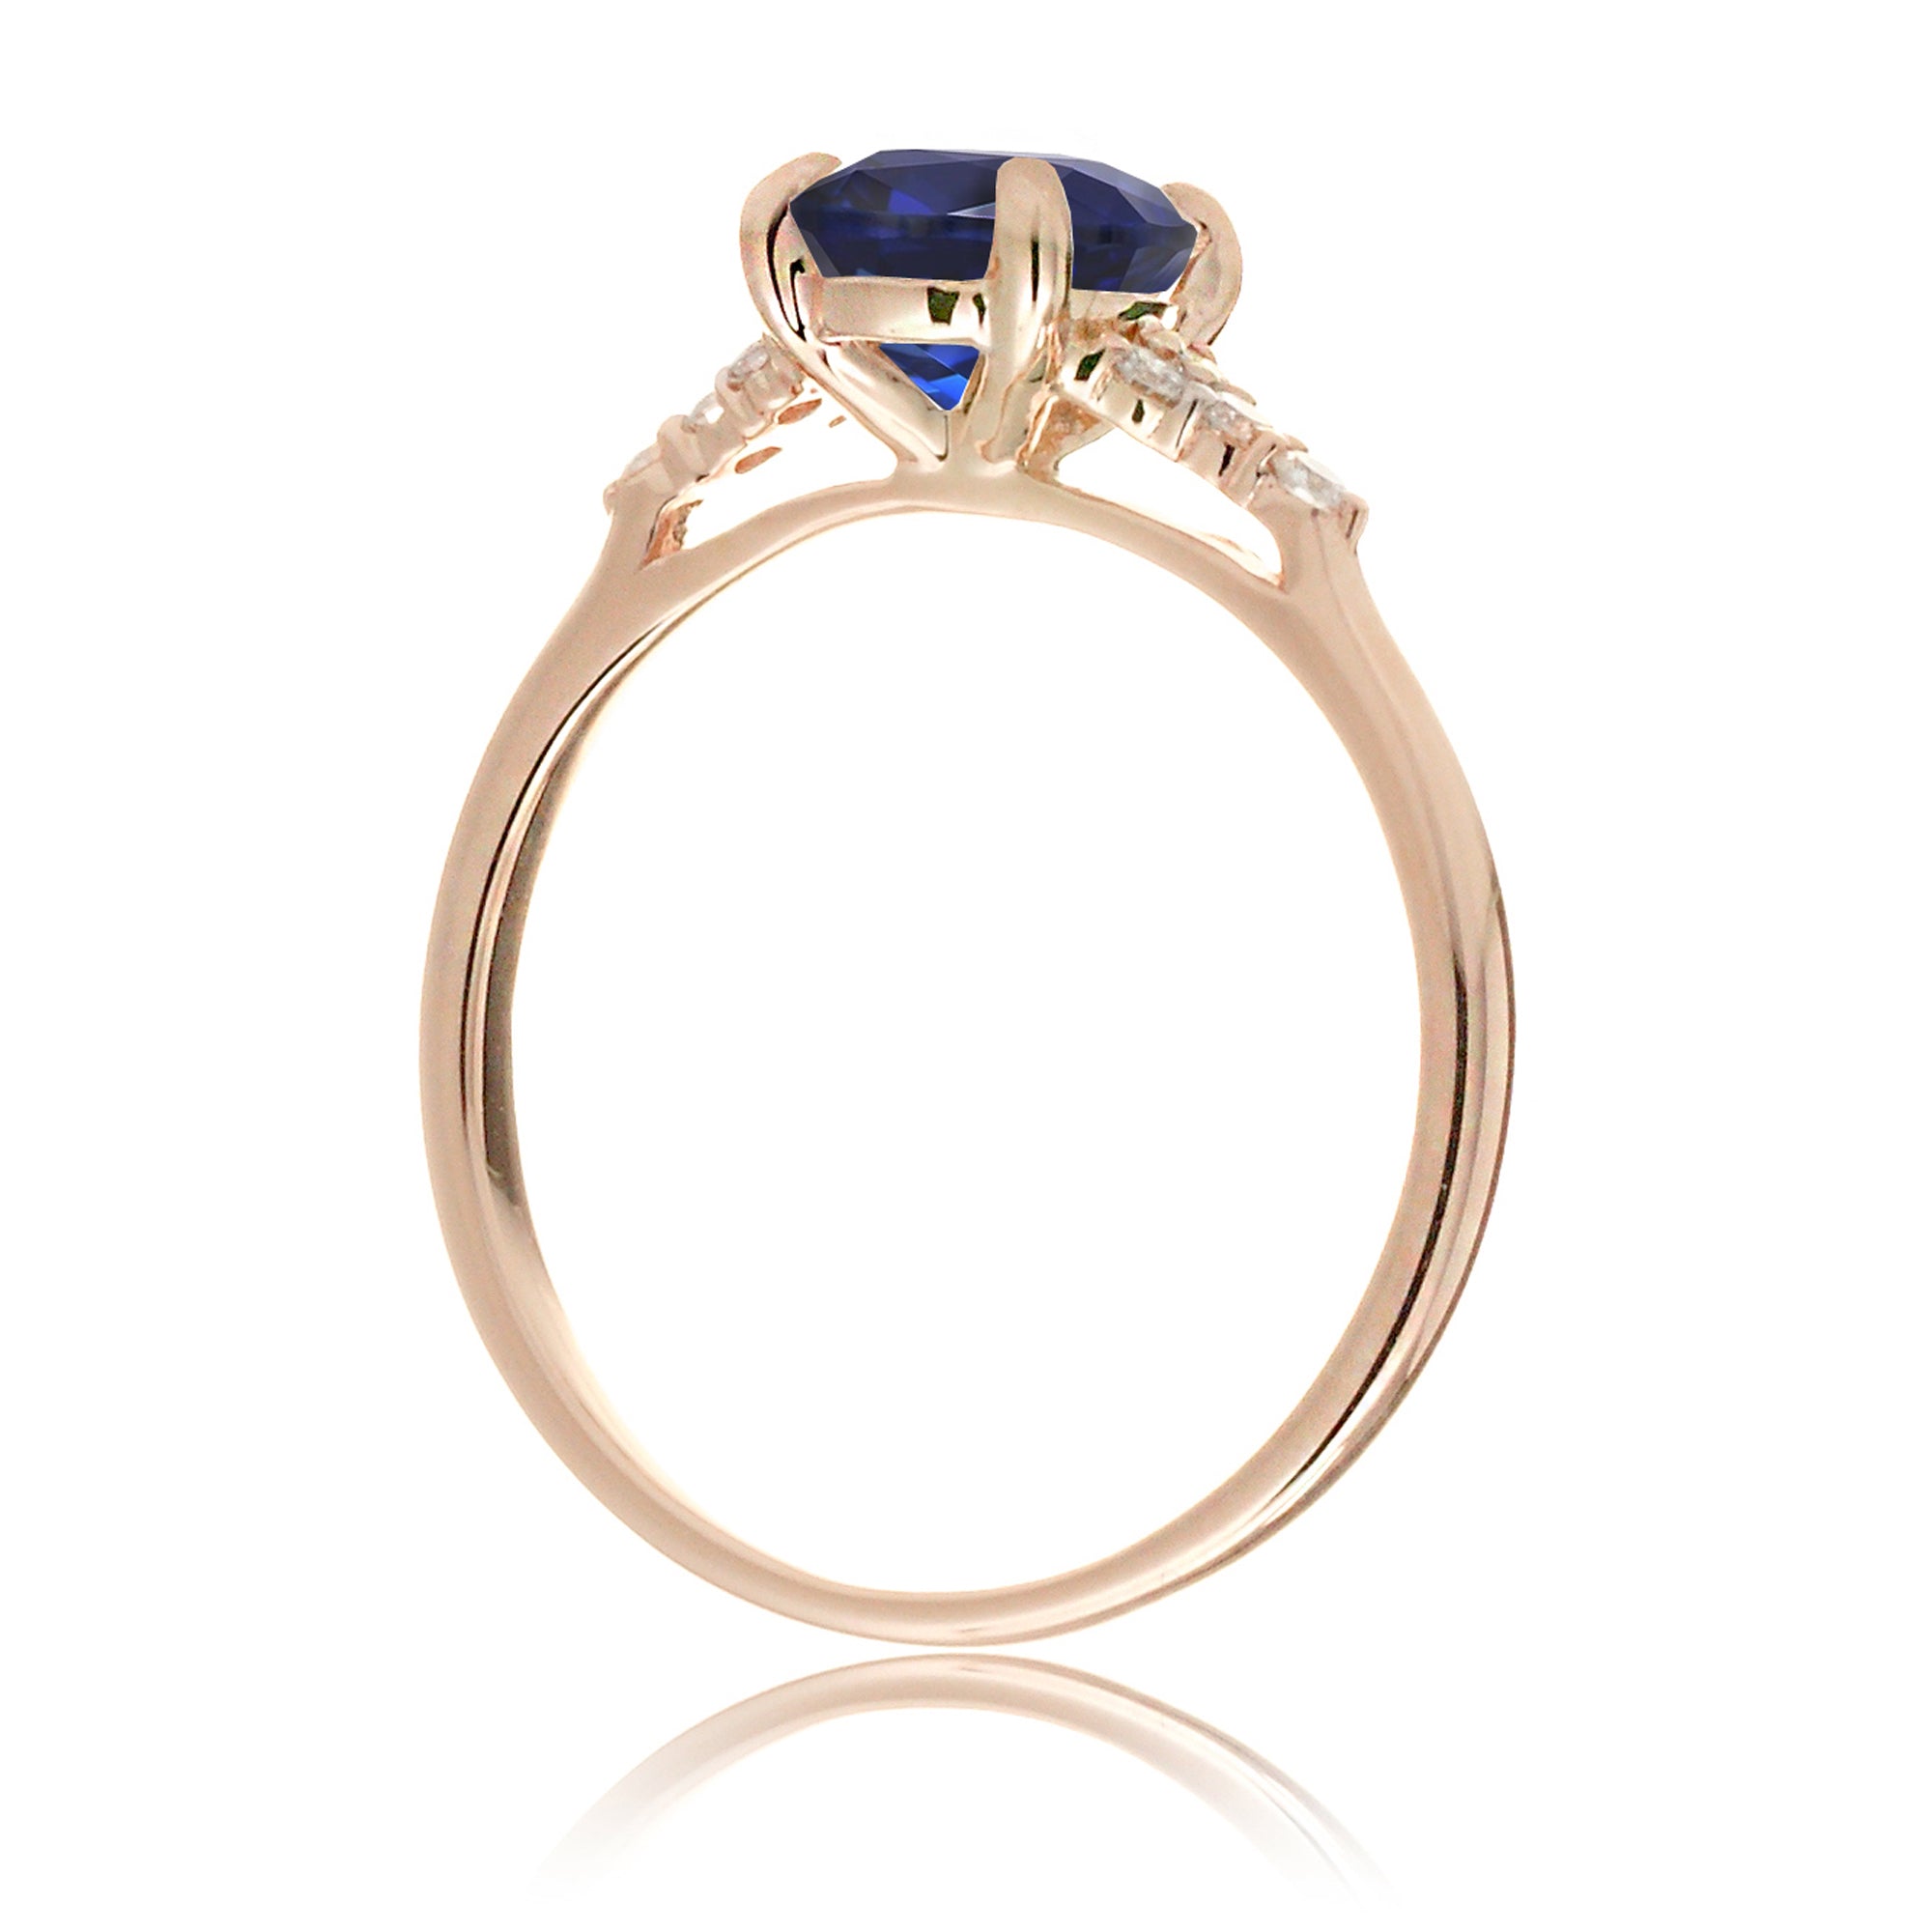 Pear shape blue sapphire diamond ring in rose gold - the Chloe lab-grown